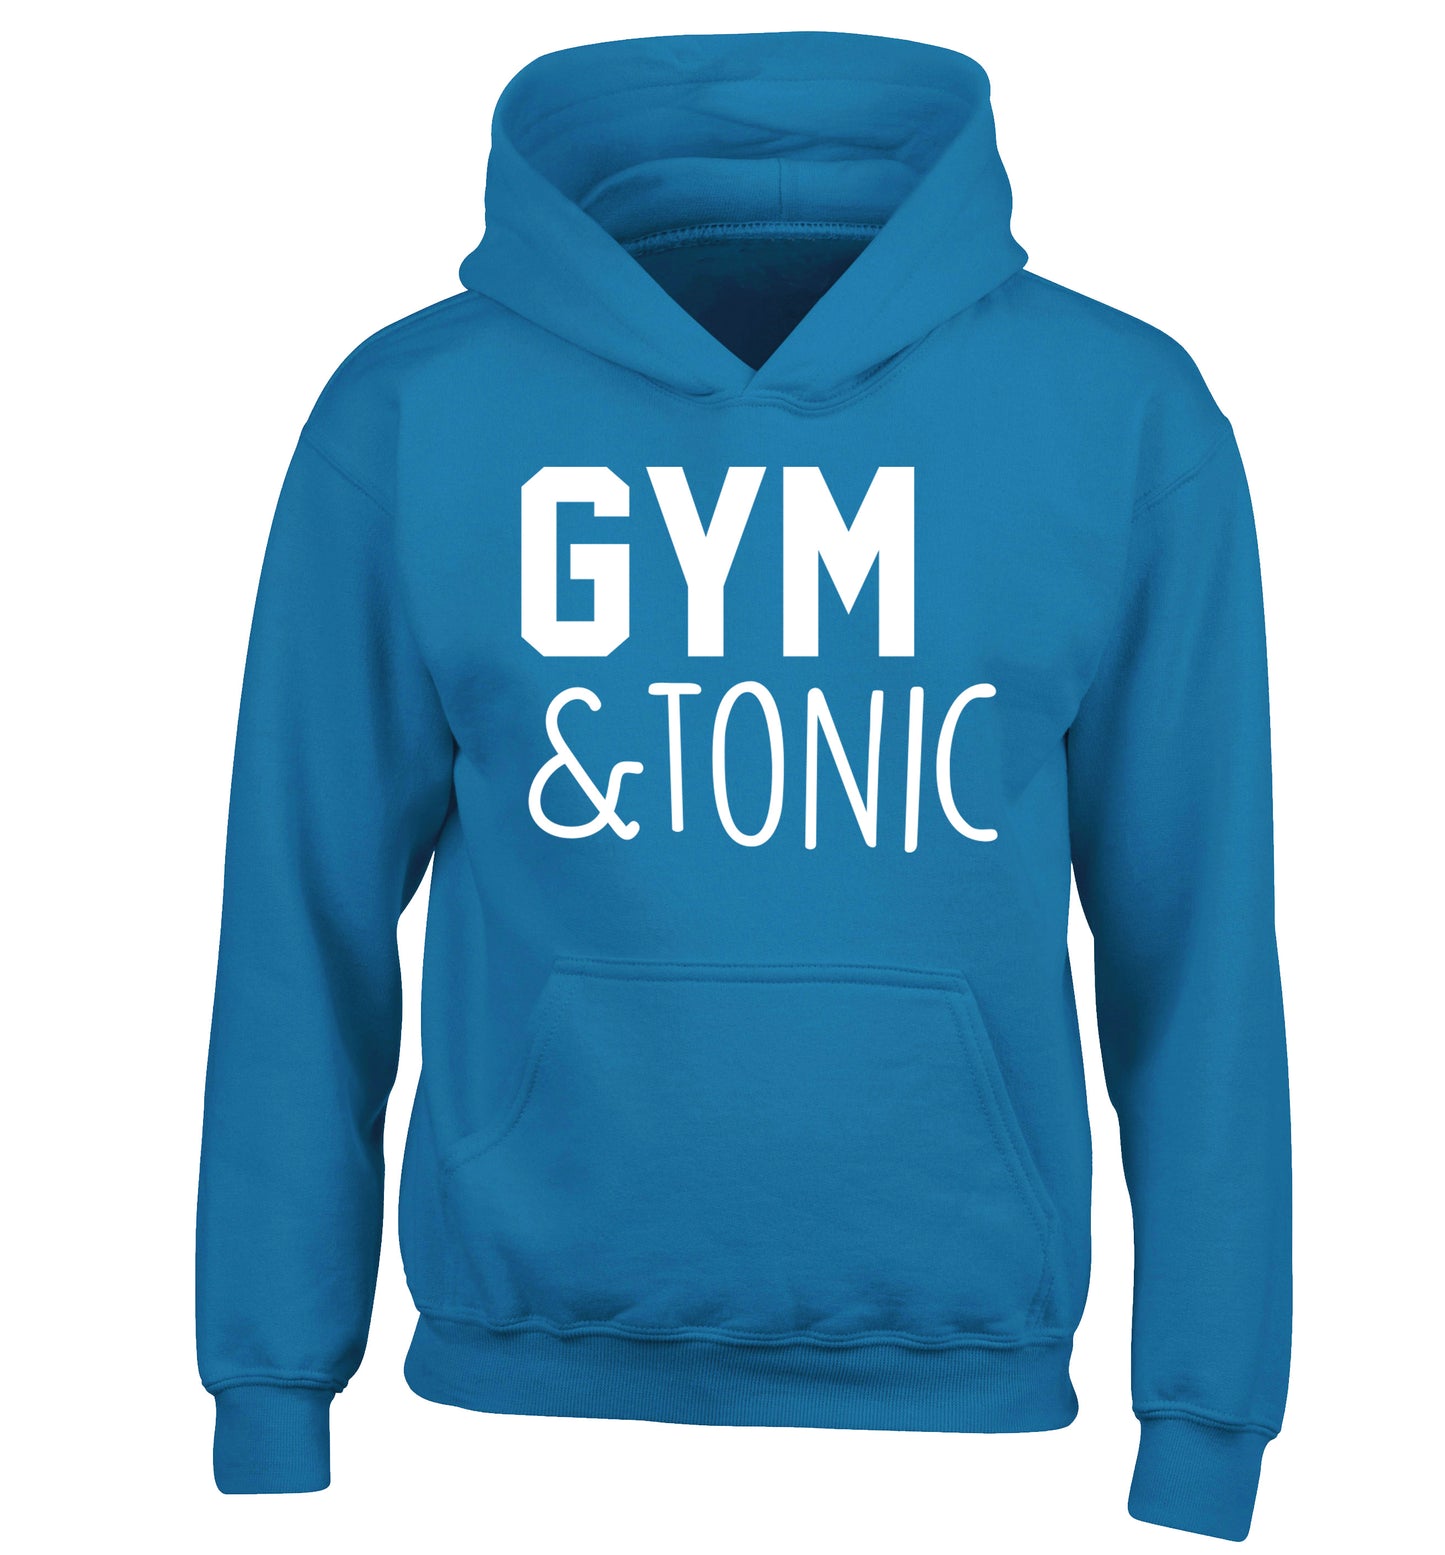 Gym and tonic children's blue hoodie 12-14 Years